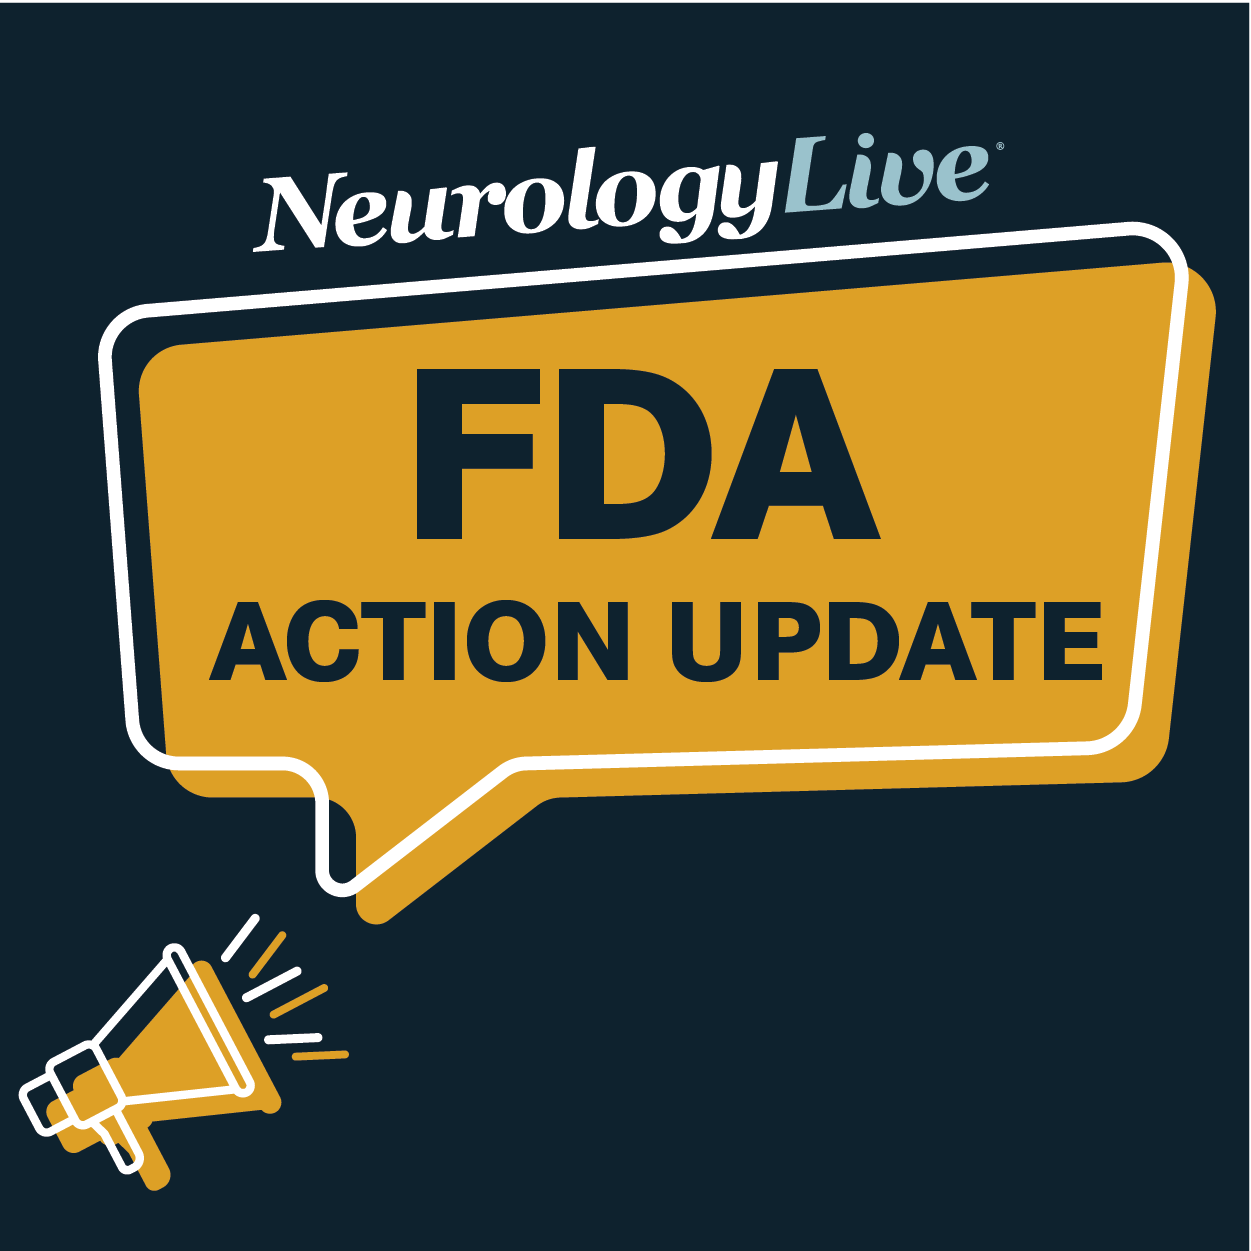 FDA Action Update, January 2022: Approvals, Acceptances, Clinical Holds